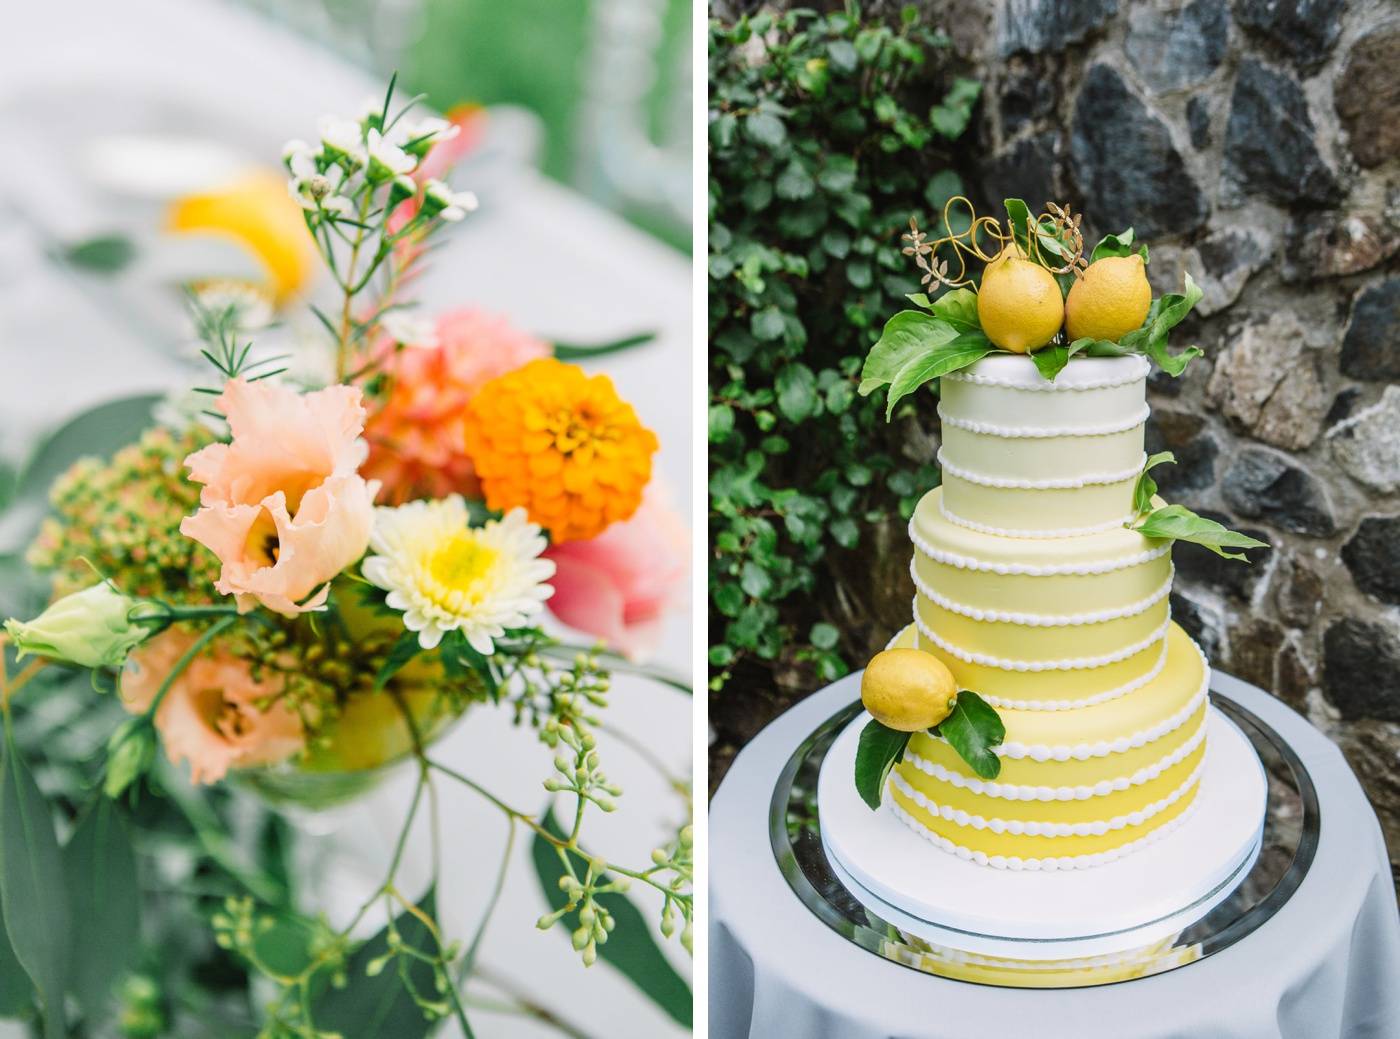 Three-tiered cake with yellow gradient fondant and fresh lemon toppers for an anniversary party